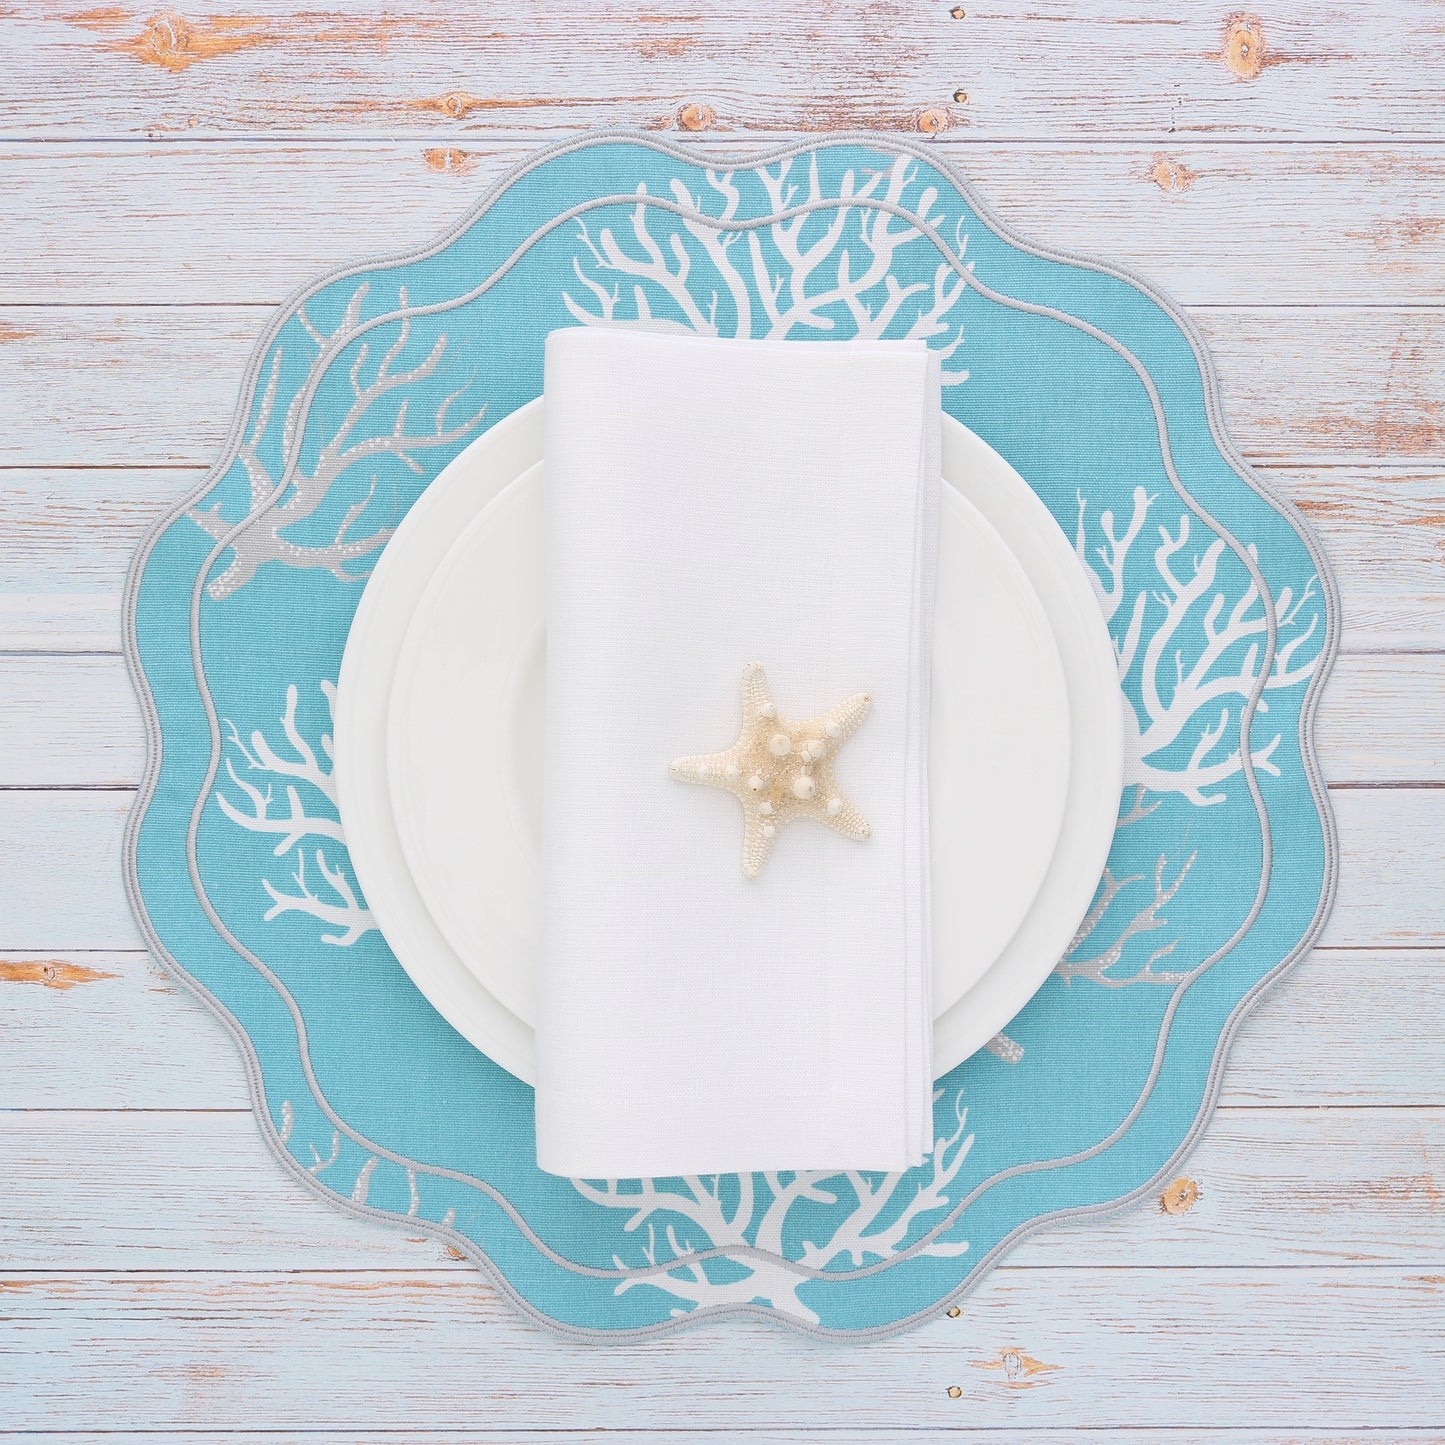 White and Grey Corals on an Aqua background placemats (set of 4)